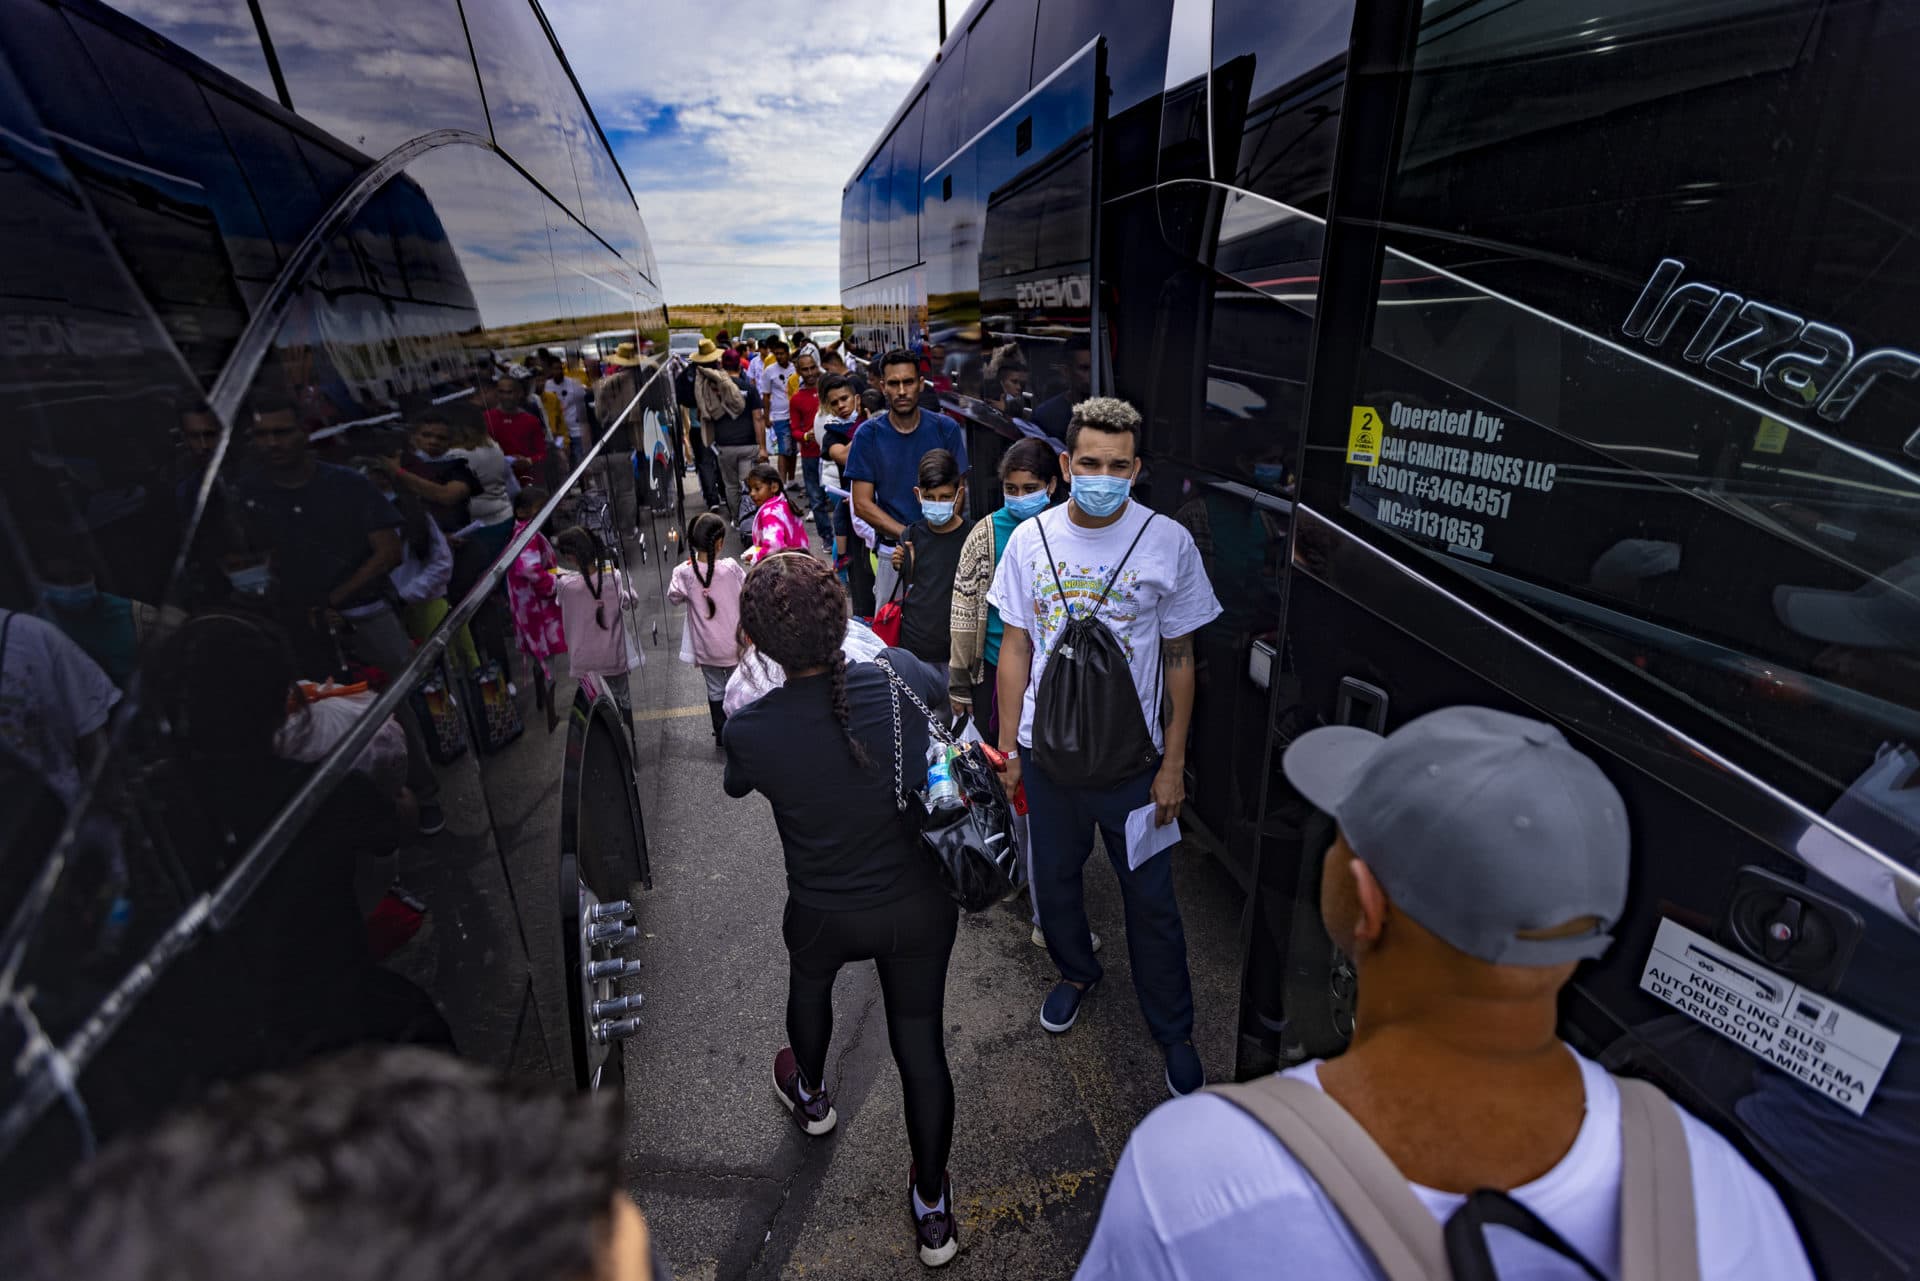 Immigrants prepare to board a charter bus bound for Chicago at the Immigration Welcome Center in El Paso. (Jesse Costa/WBUR)